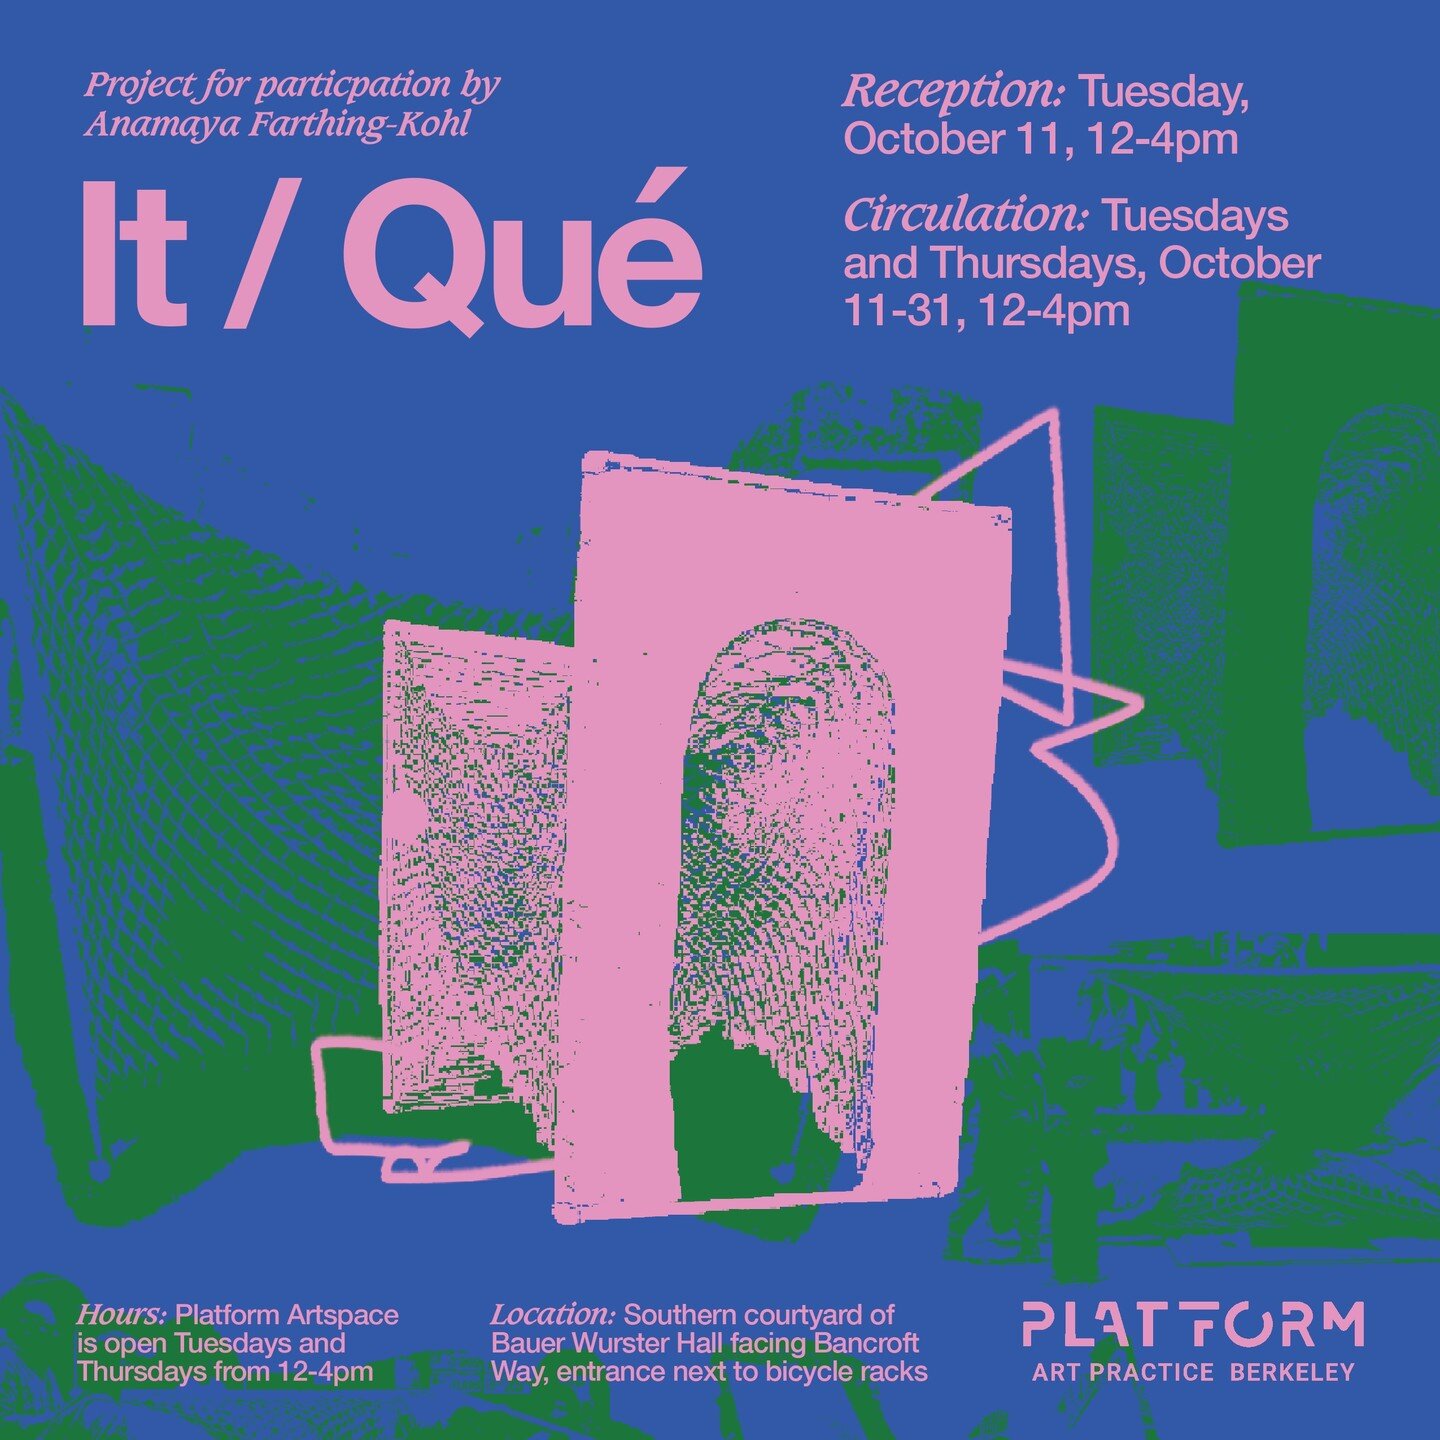 IT/QU&Eacute;
Platform Artspace 
Tuesdays/Thursdays, 12-4pm

Meet IT/QU&Eacute; - a sculpture-in-residence at Platform Artspace throughout the month of October. During its time at Platform, It will be in circulation, you can check out it just like a 